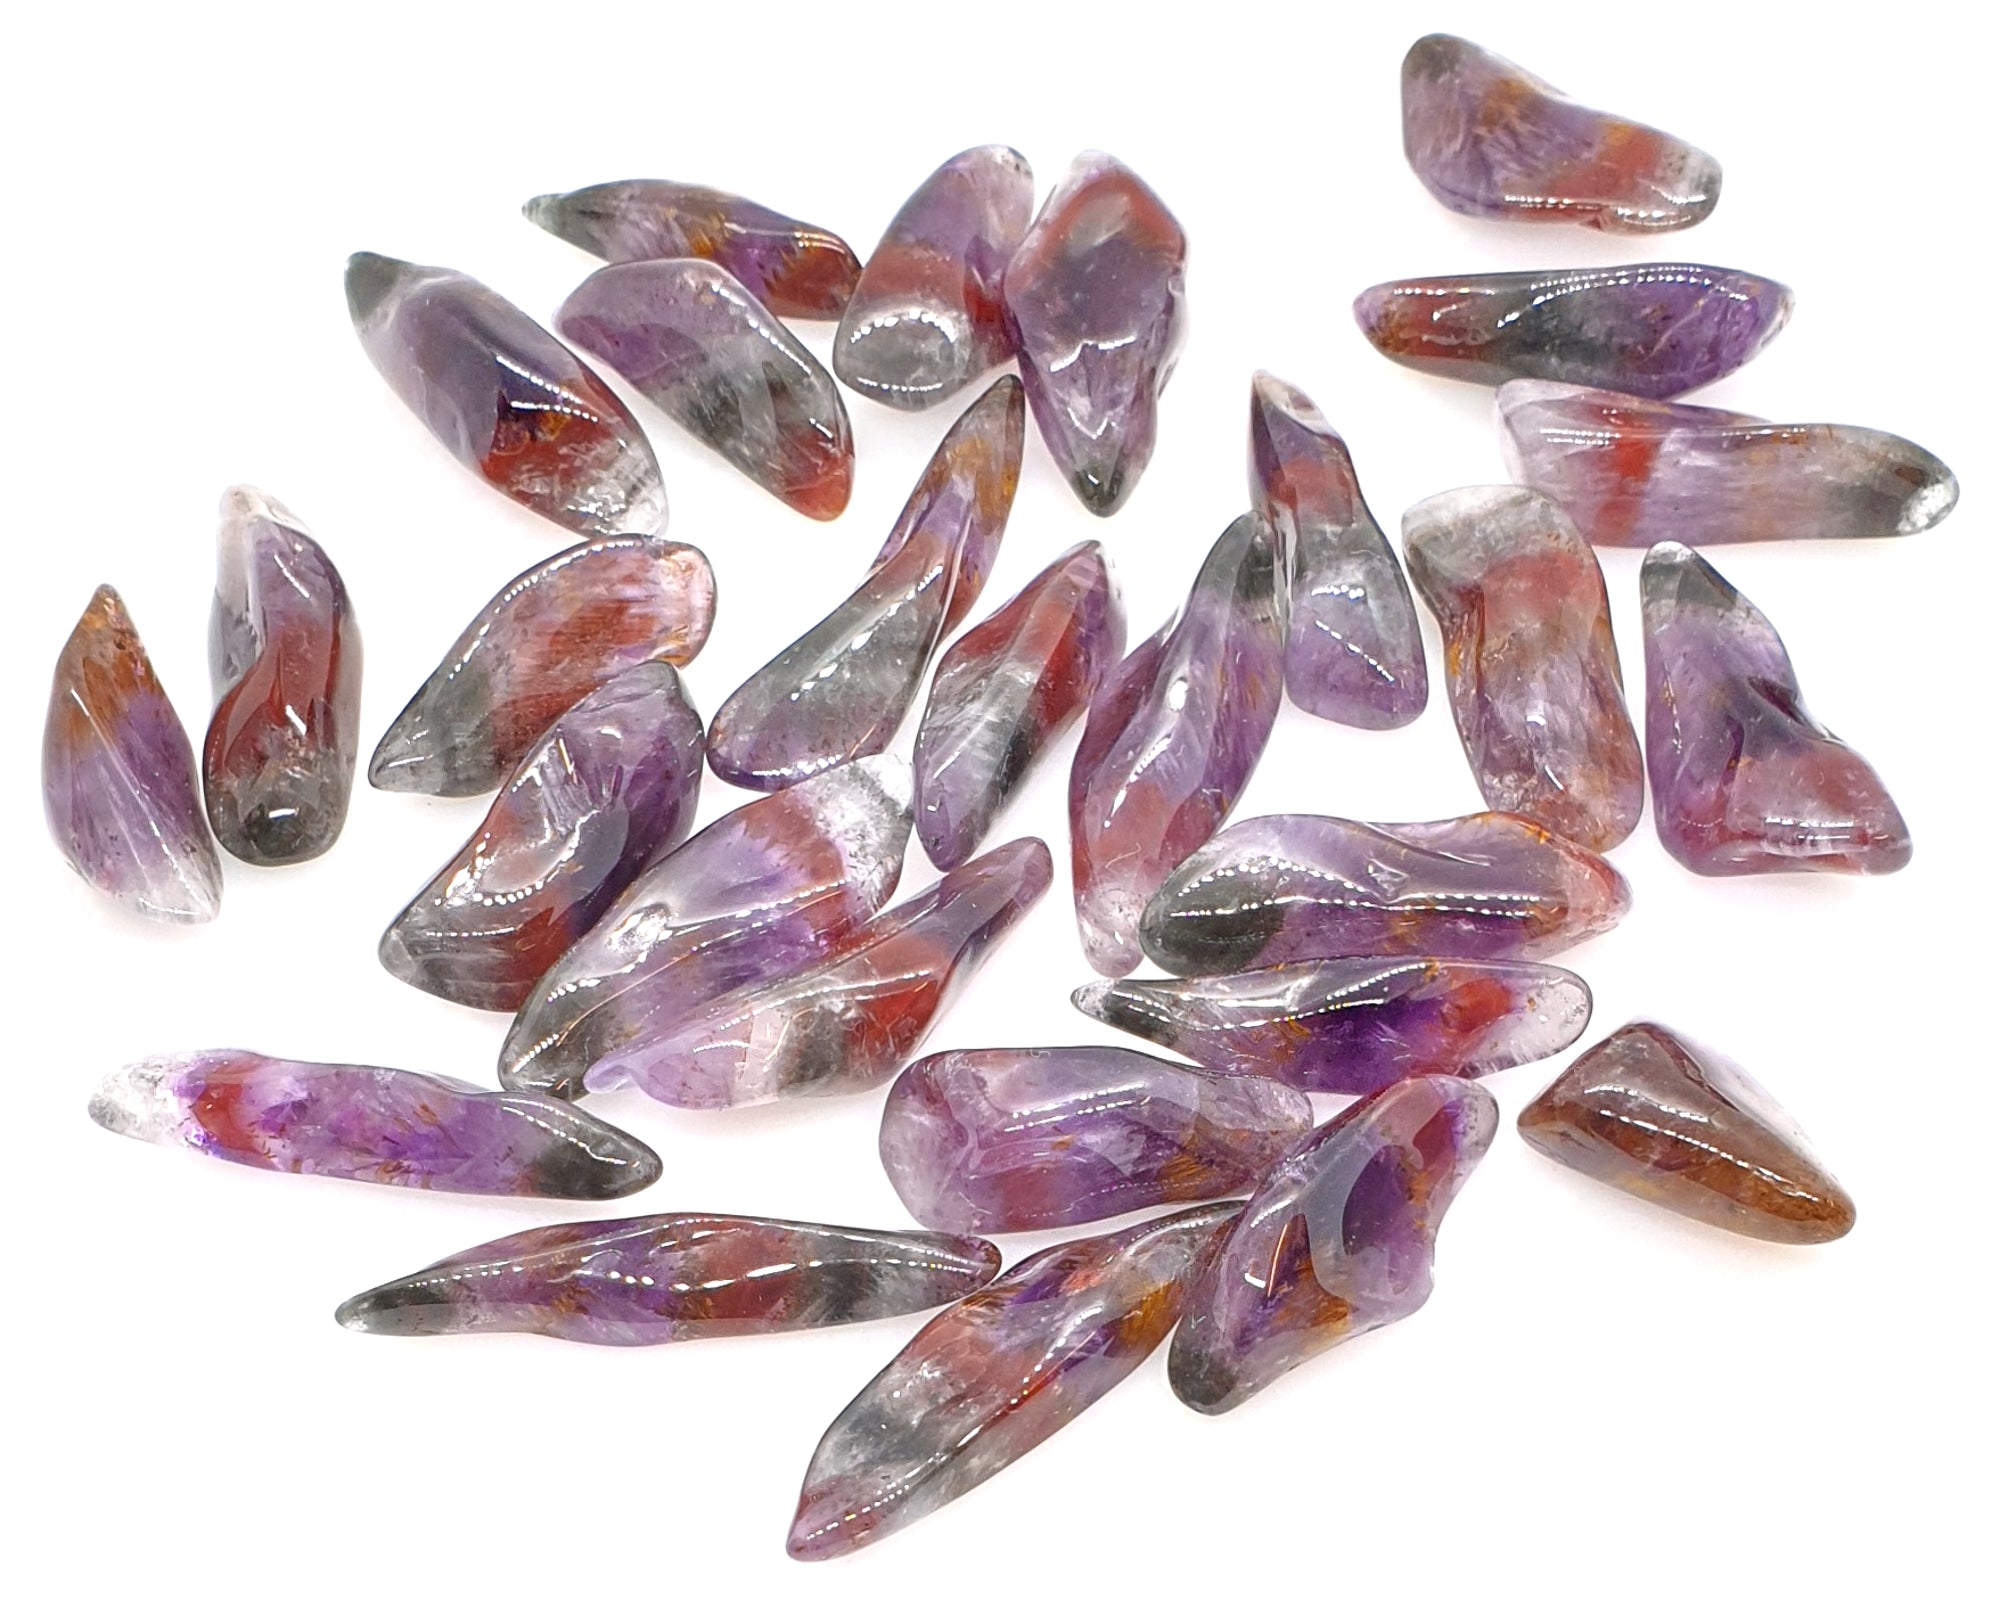 Auralite-23 Polished Tumble Stone 20-30mm Single Pointy, purple, red, black and clear, smooth, shiny